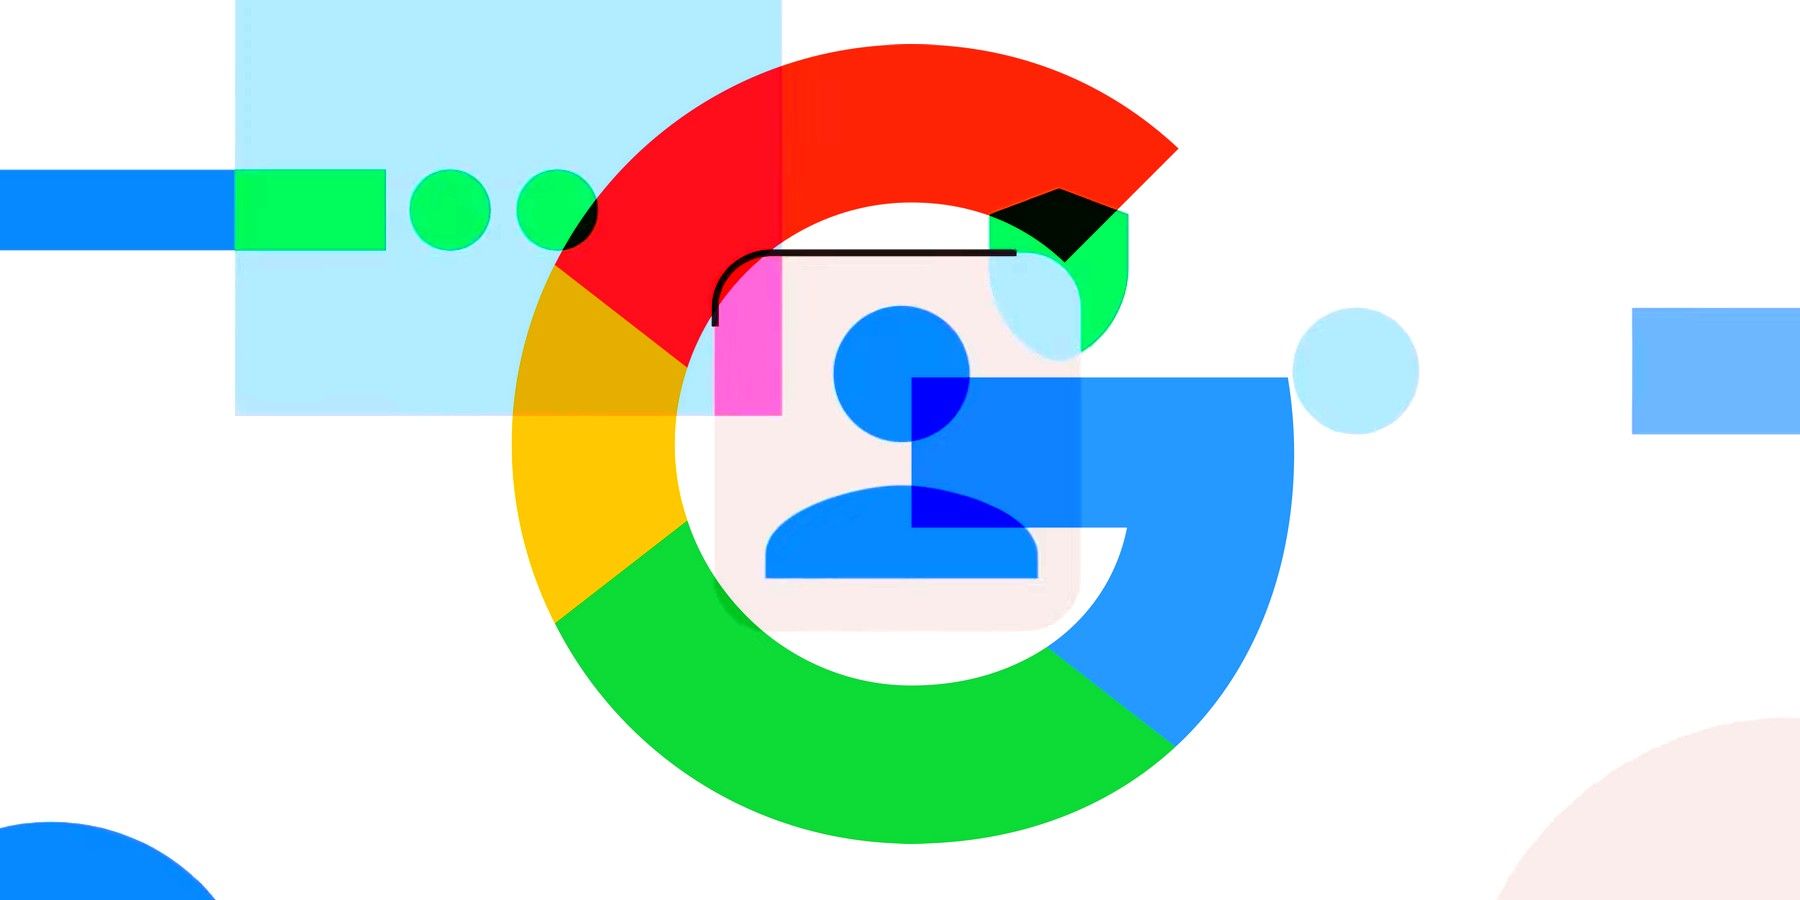 Google proposes new Topics system for web activity tracking.